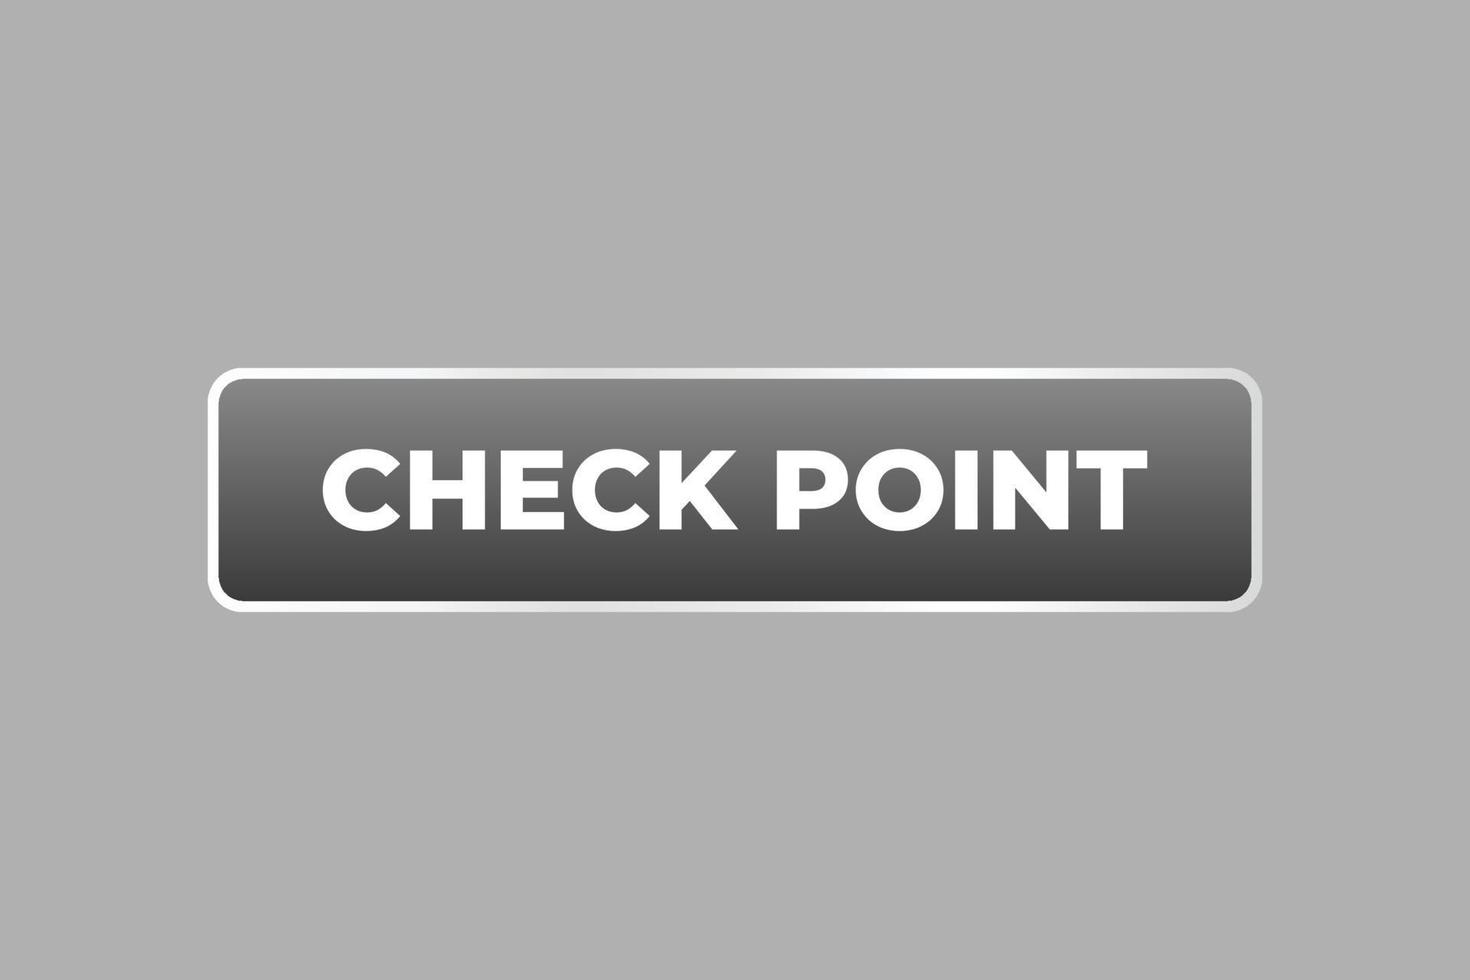 Check Point Button. Speech Bubble, Banner Label Check Point vector